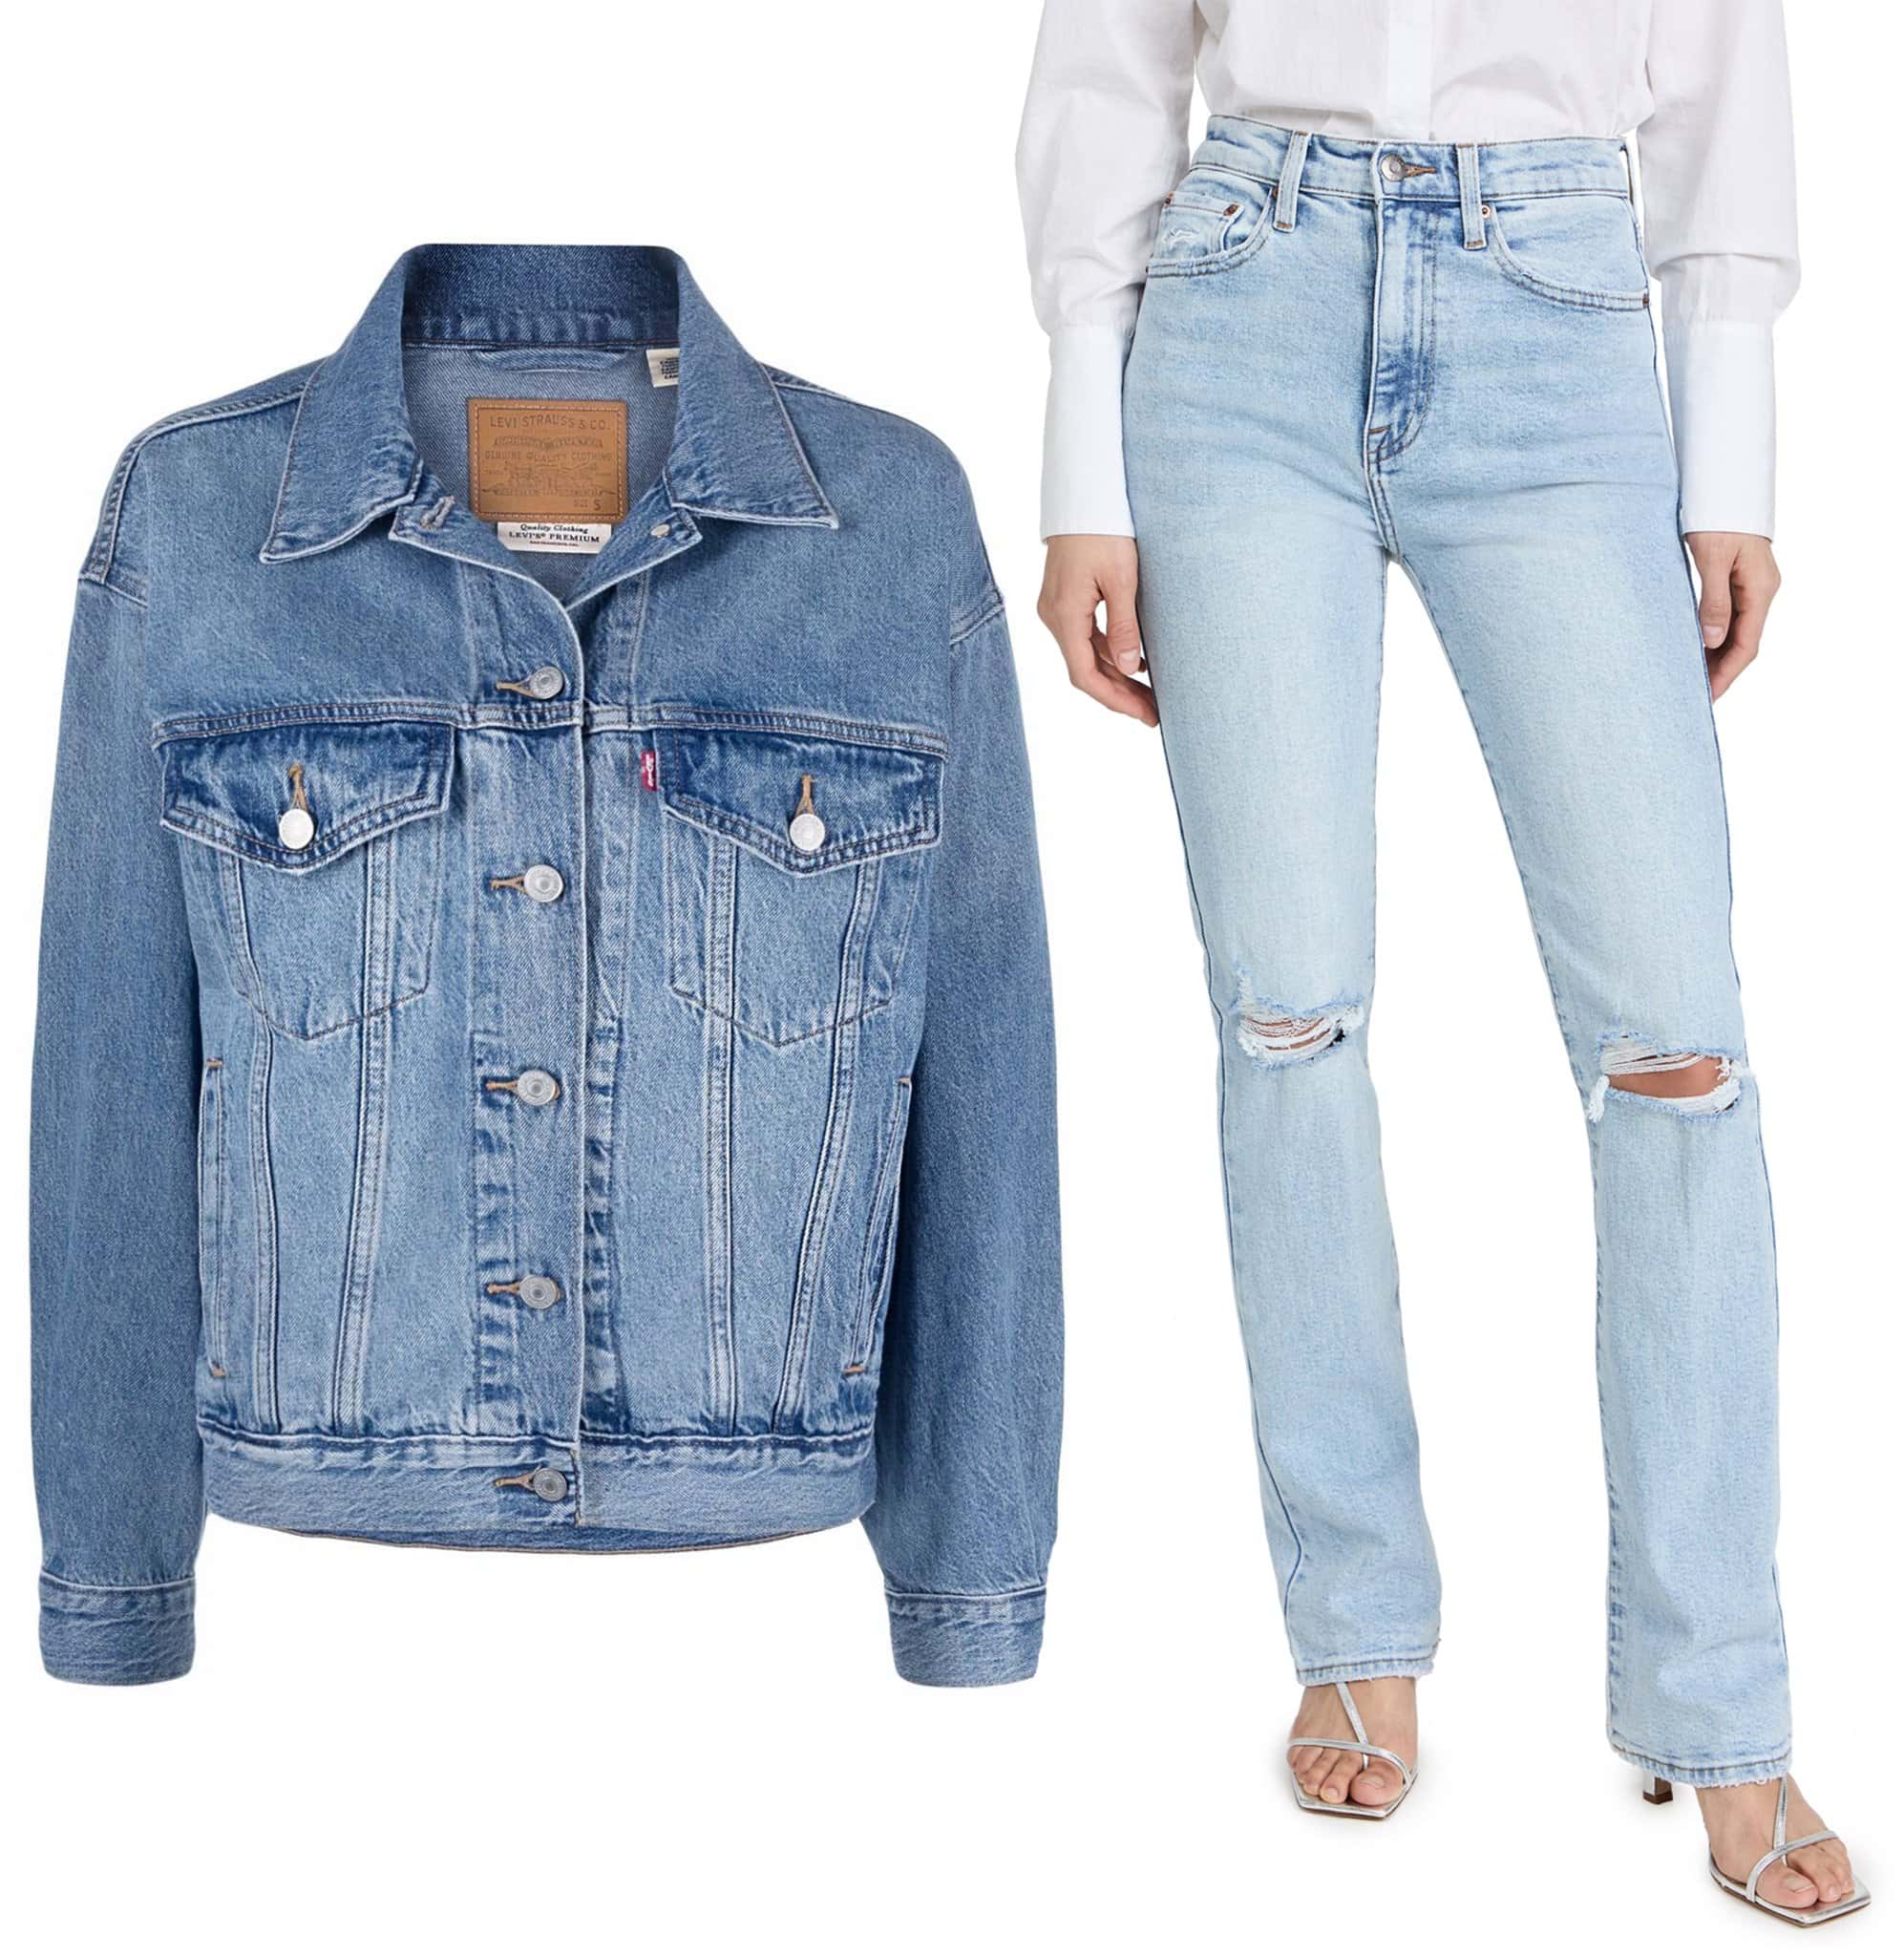 Modern Denim Duo: Featuring Levi's The Original Trucker denim jacket and Pistola Denim's Dana High Rise Boot Cut Jeans, this outfit exemplifies the perfect blend of contemporary fashion with classic denim staples